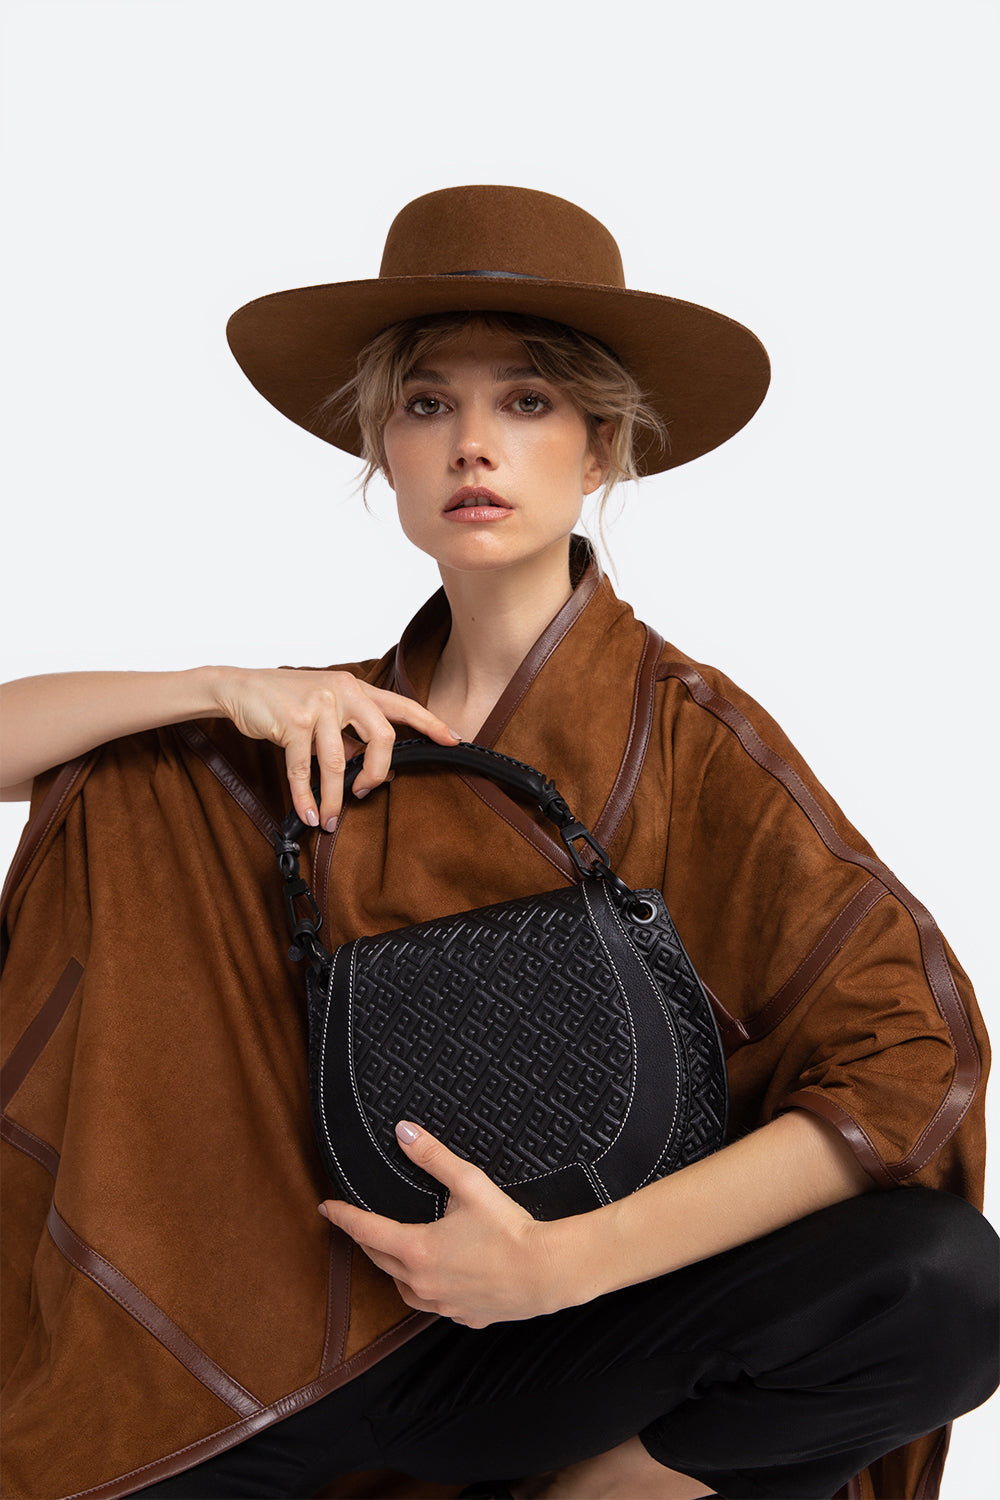 The Lucky Bag, Embossed Leather Saddle Bag in Black